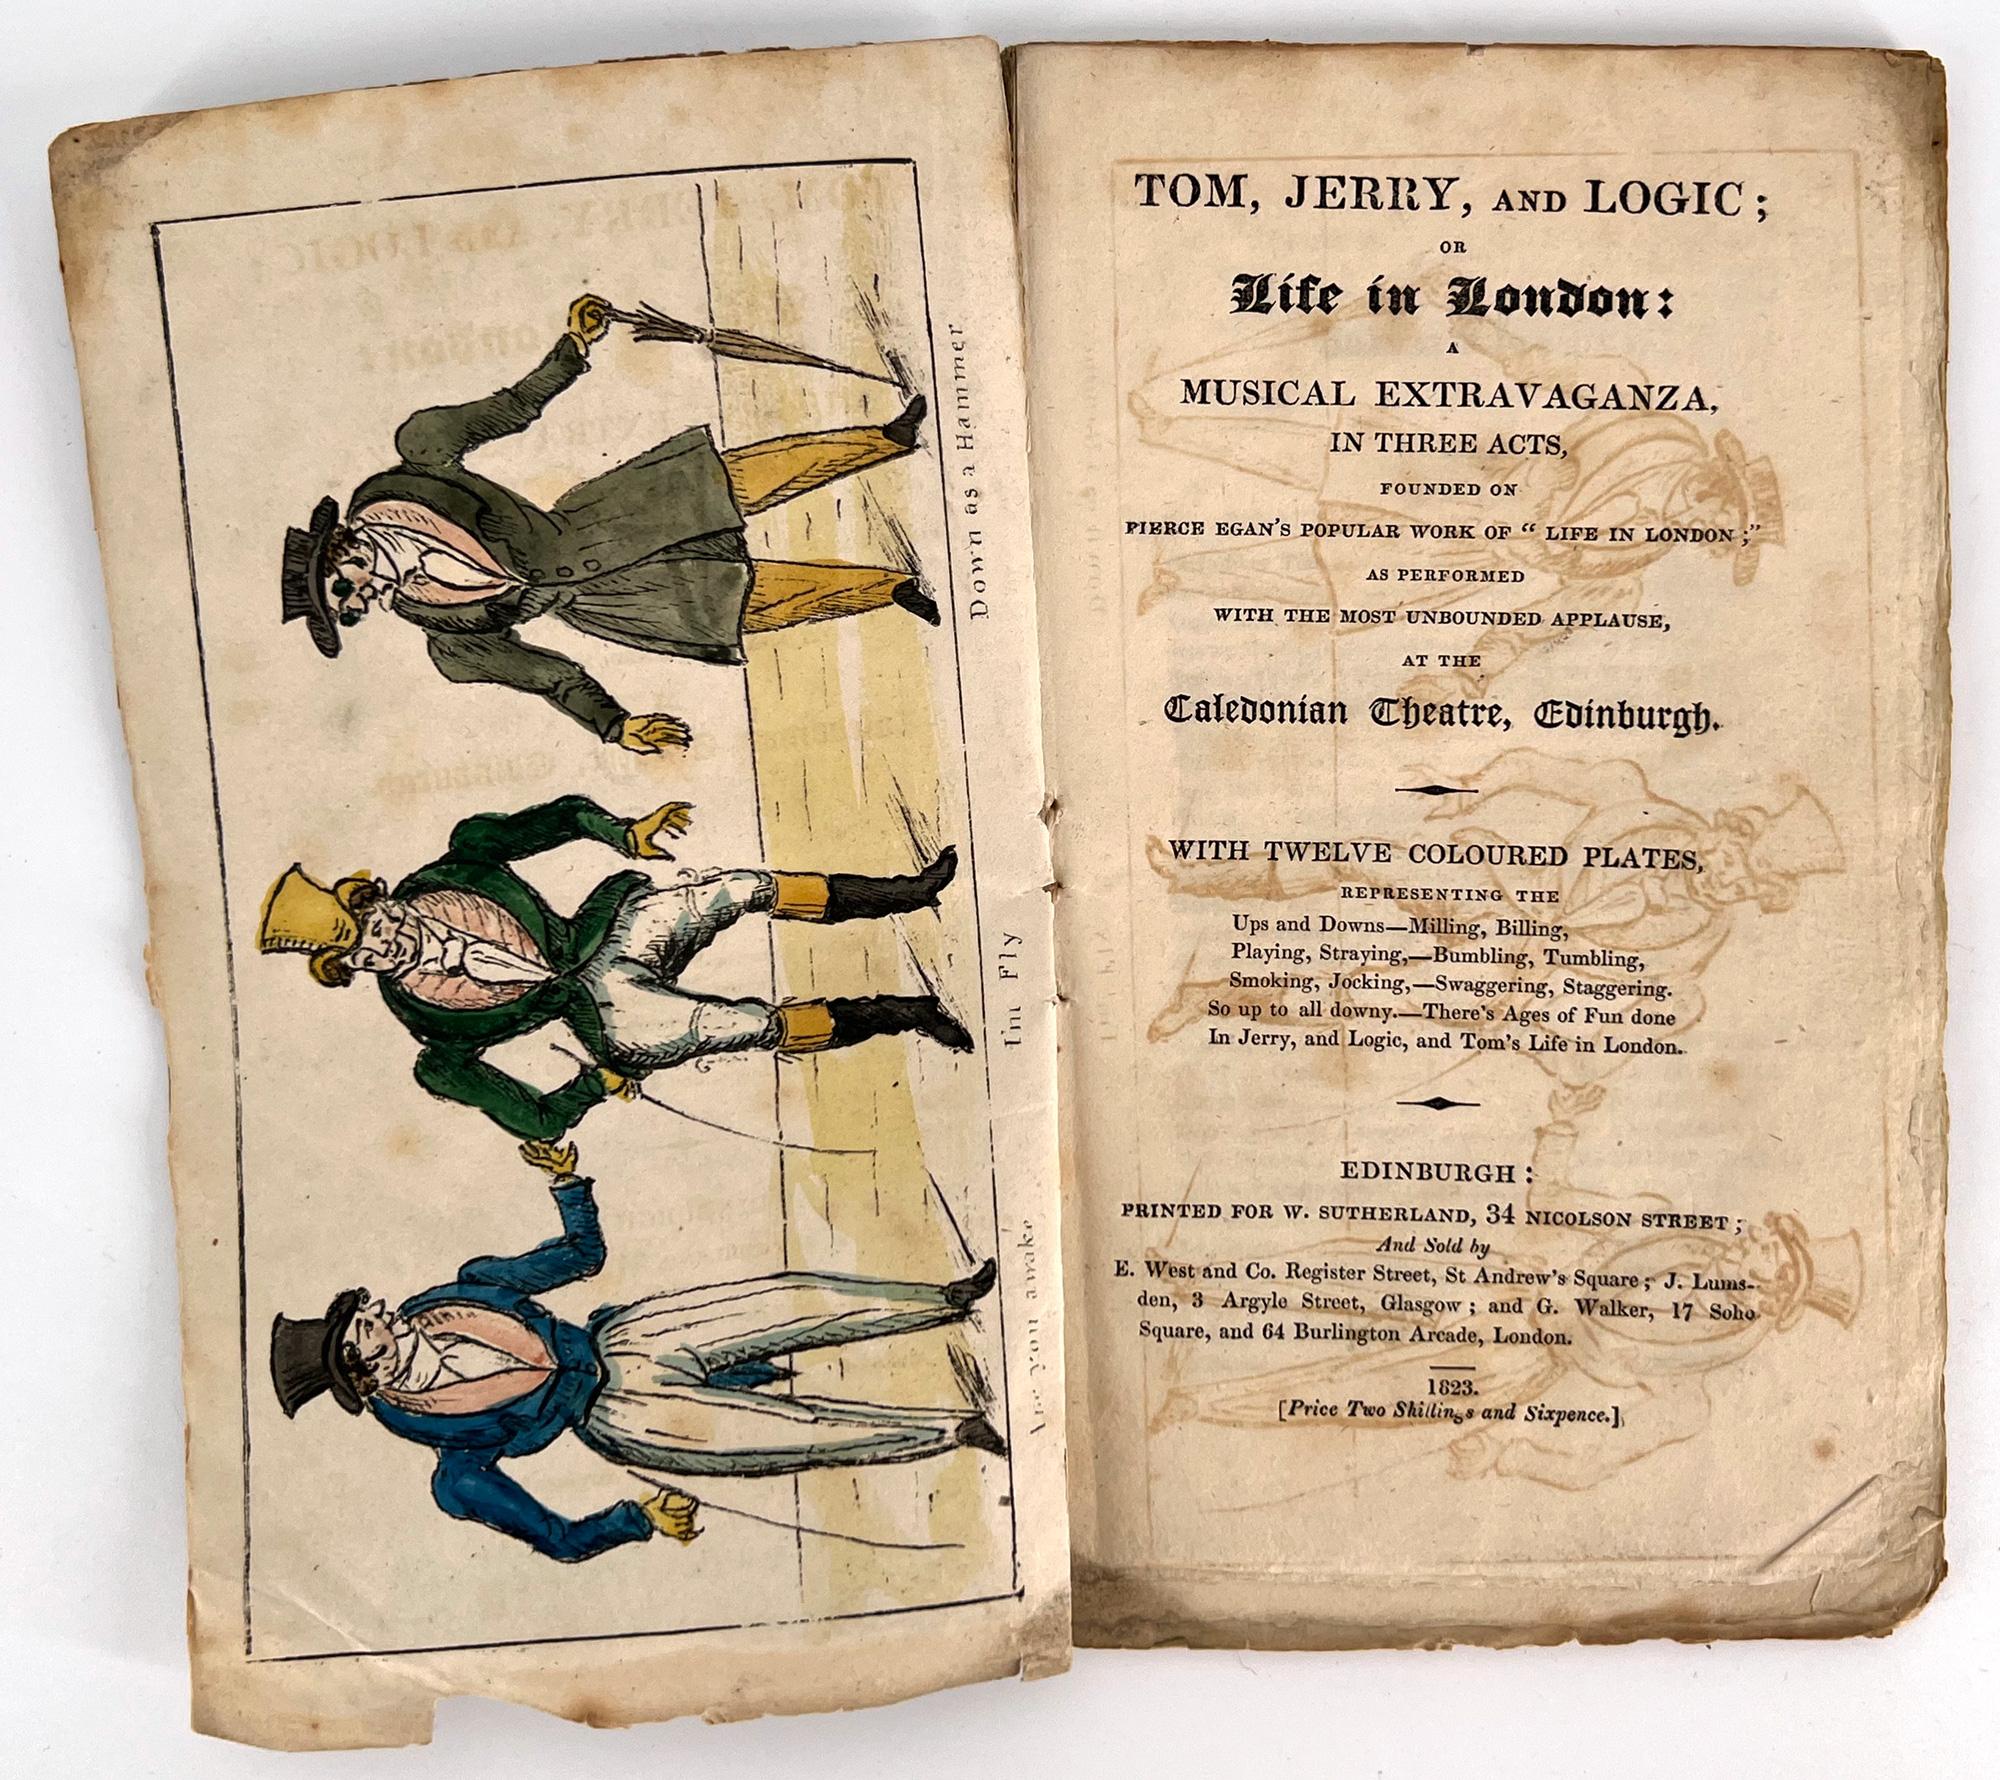 A RARE Caledonian Theatre pamphlet, with witty satirical color plates in the Cruikshank style. 
Tom, Jerry, and Logic or Life in London: A Musical Extravaganza in Three Acts. Founded on Pierce Egan's Popular Work of 